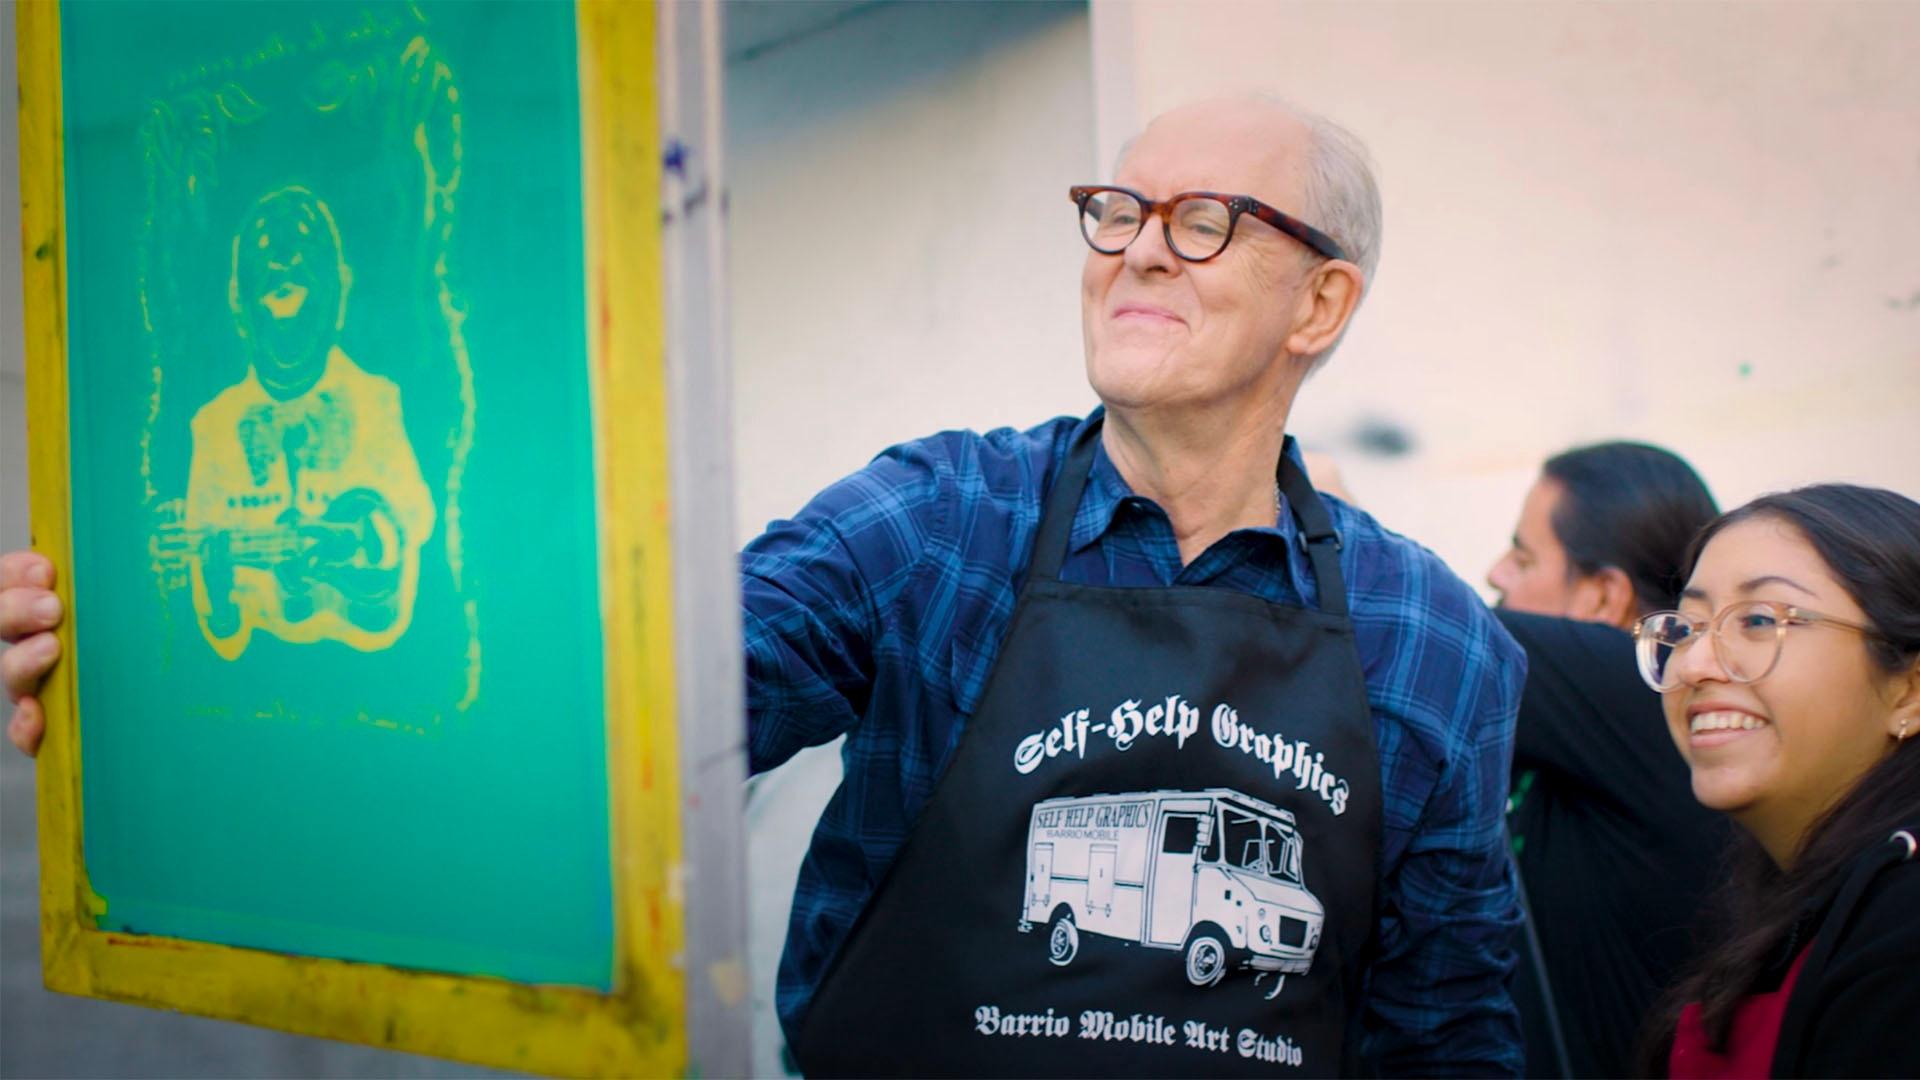 John Lithgow, smiles while working on canvas